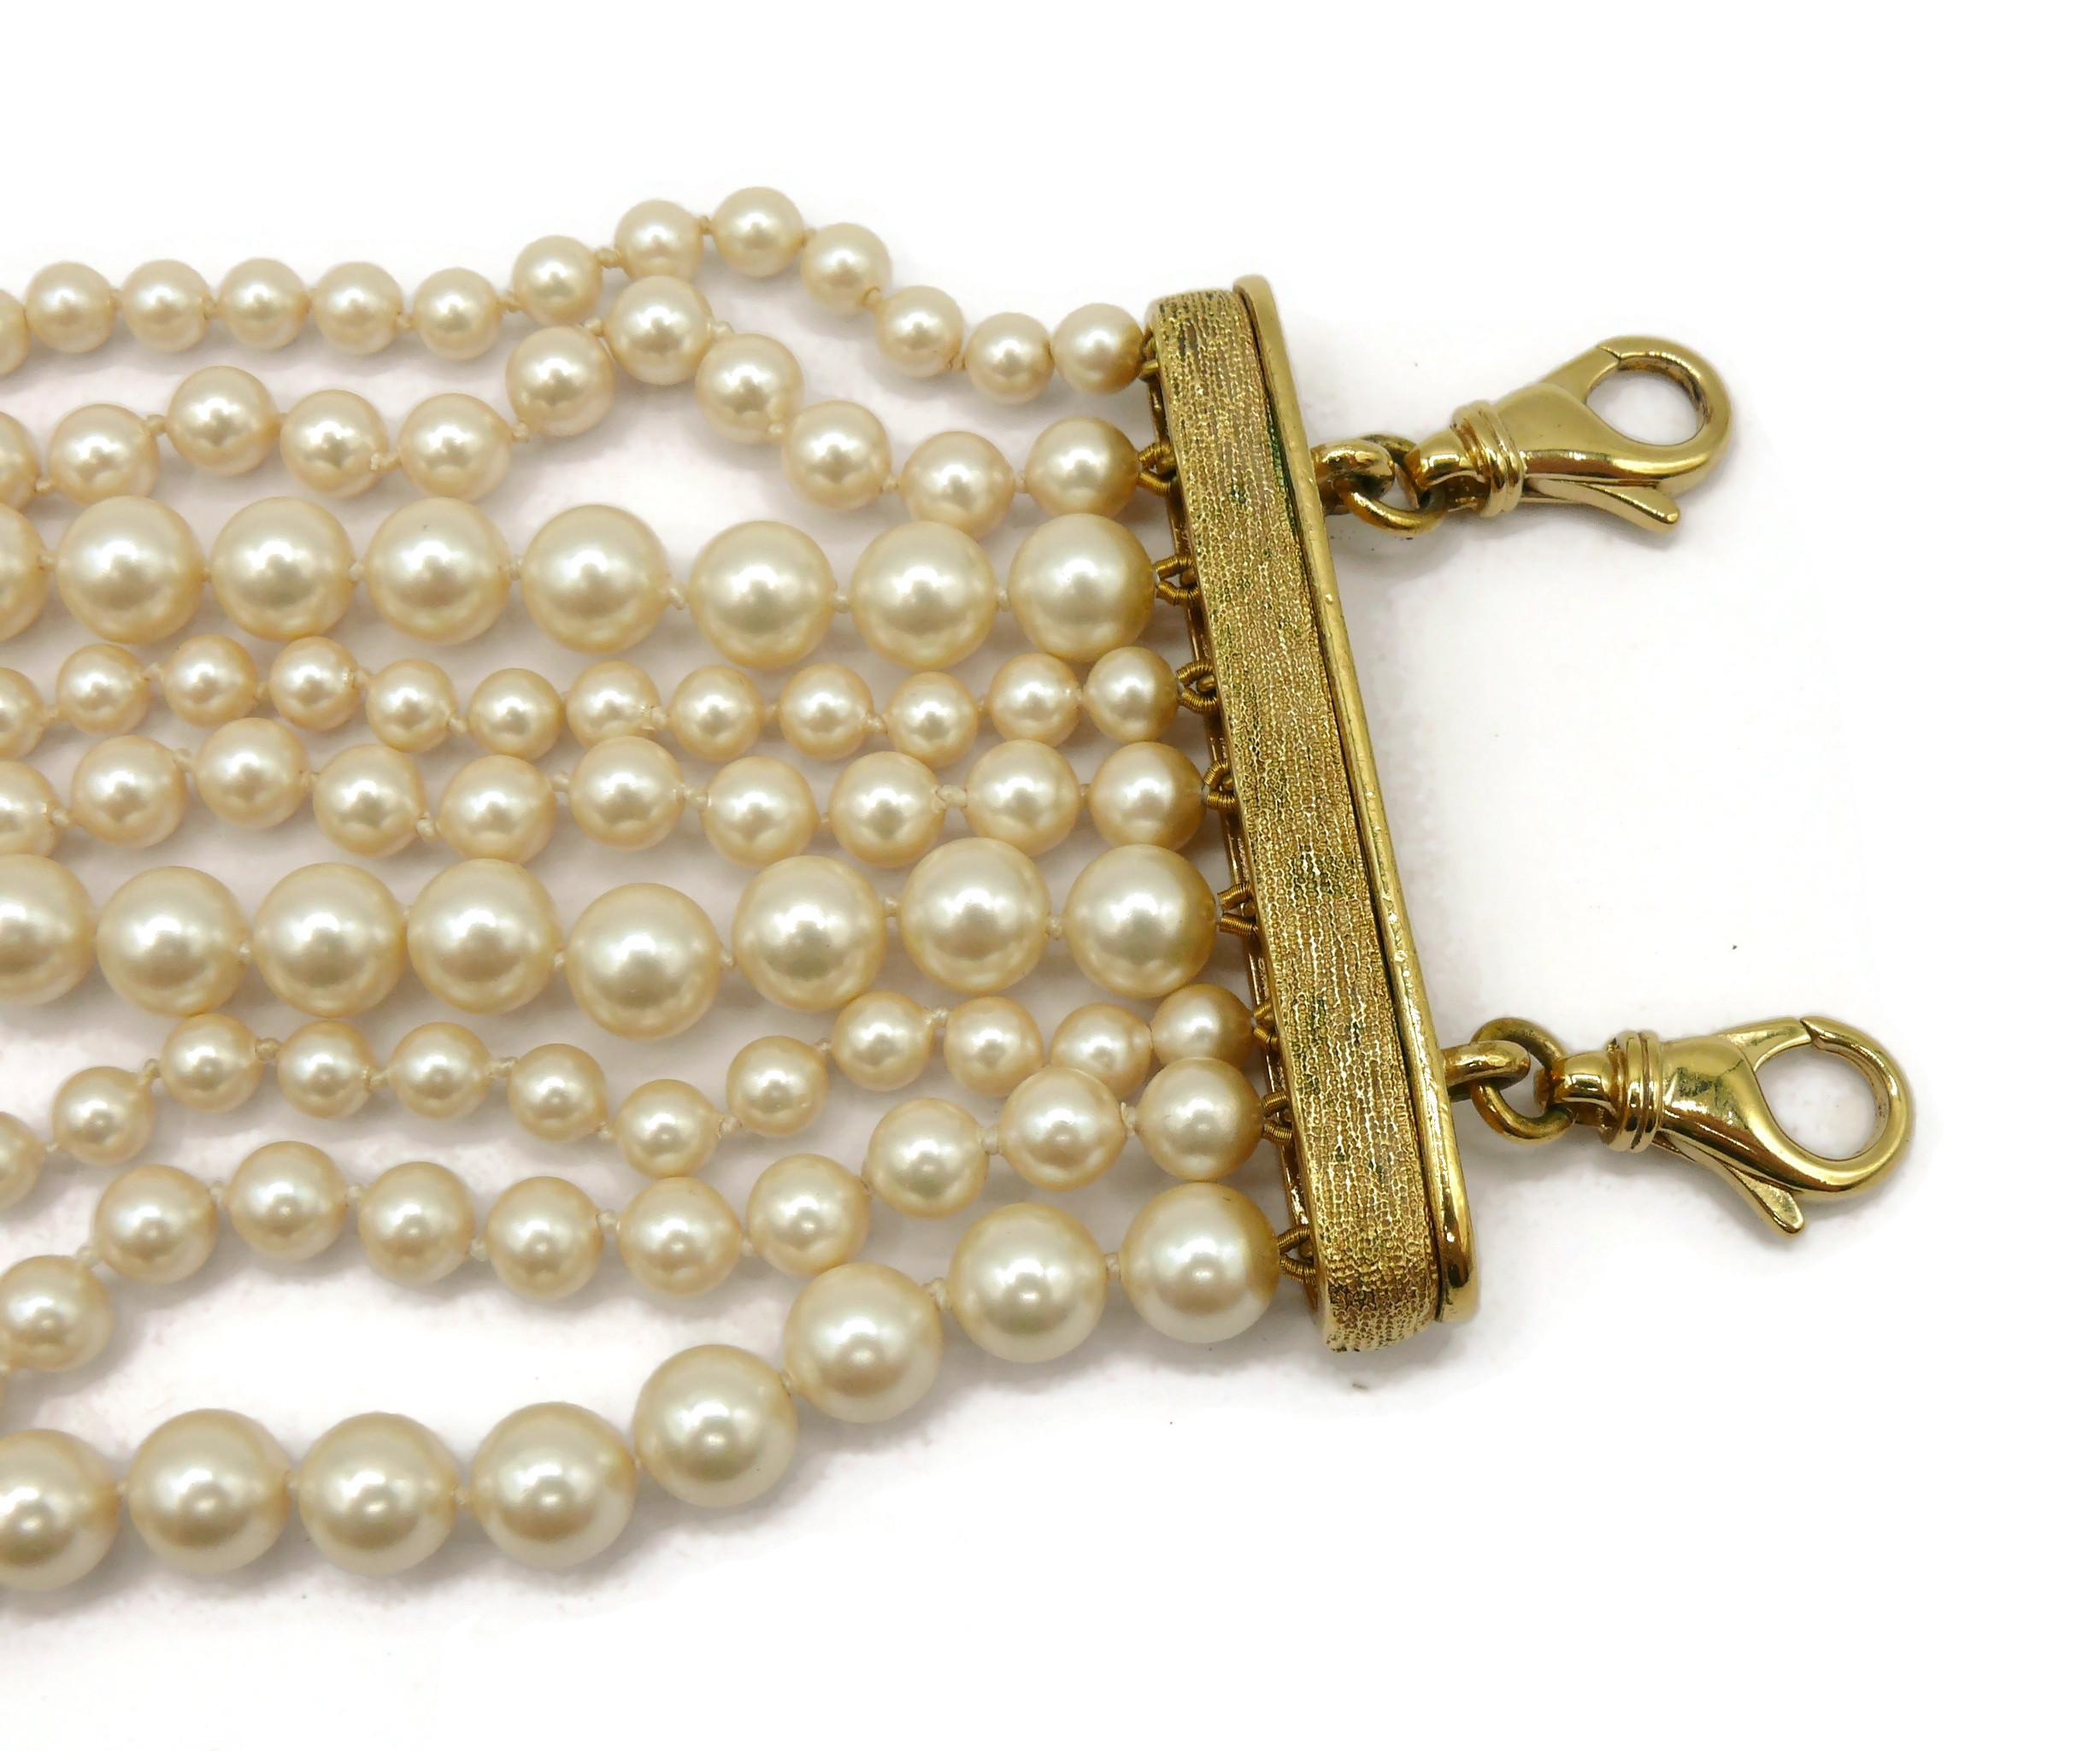 CHRISTIAN DIOR Vintage Multi-Strand Faux Pearl Necklace For Sale 6